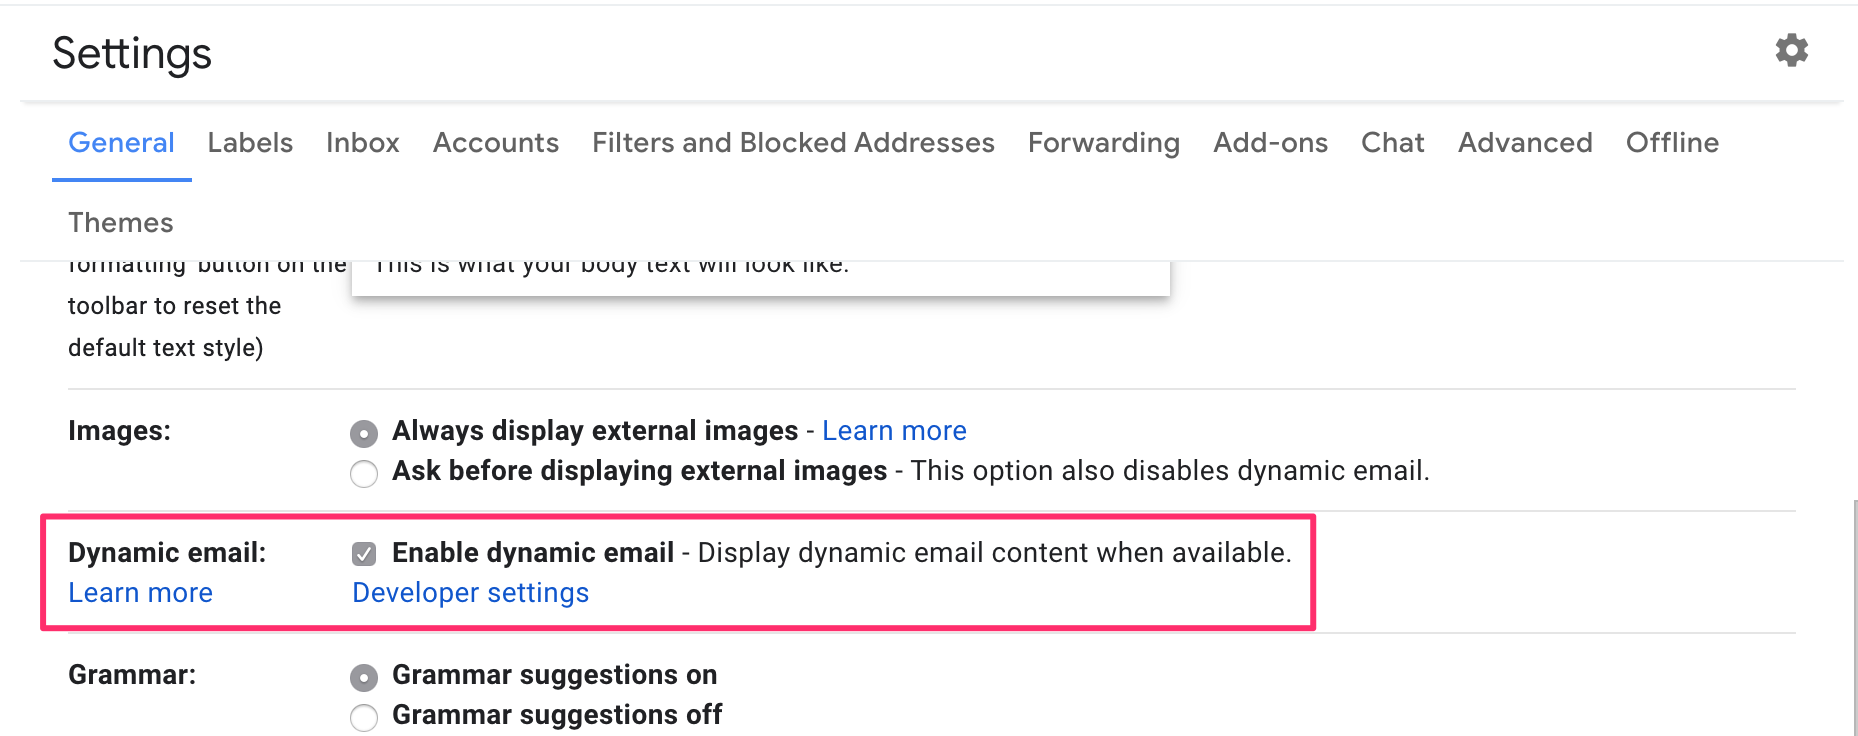 An example of Gmail settings with the "Enable dynamic email" checkbox selected.